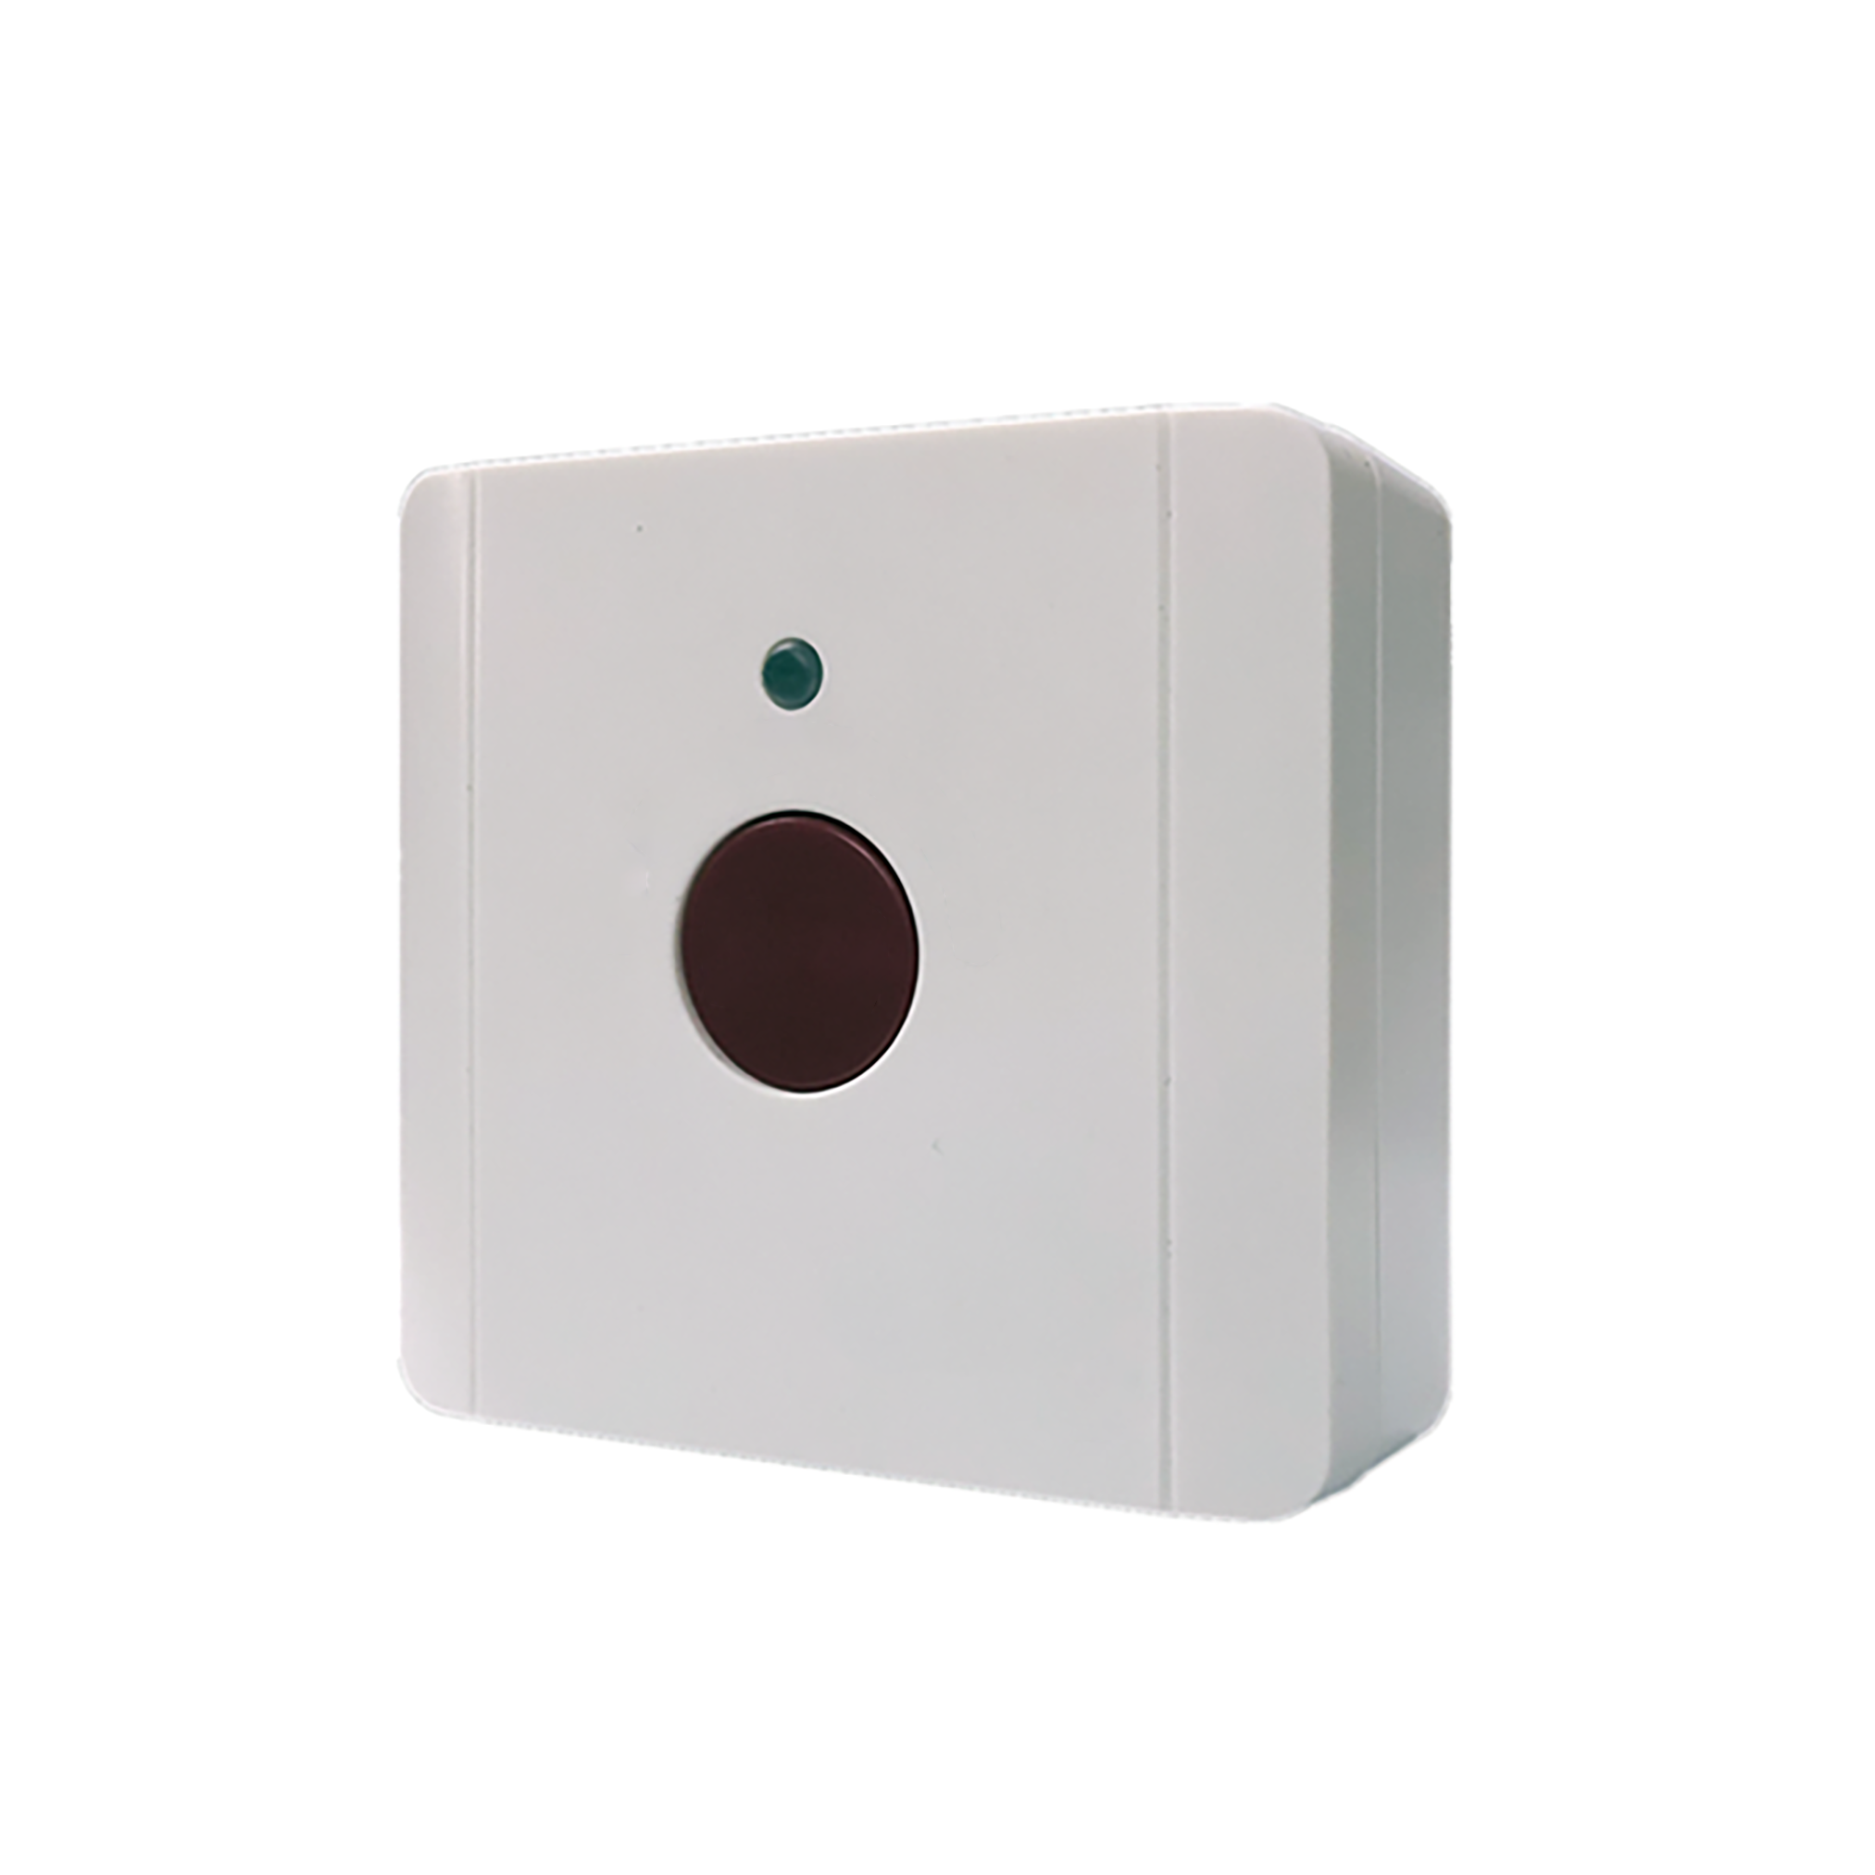 J-SAP-JBF4124R Manual Alarm Switch: Easy-to-Use Security Control for Enhanced Protection